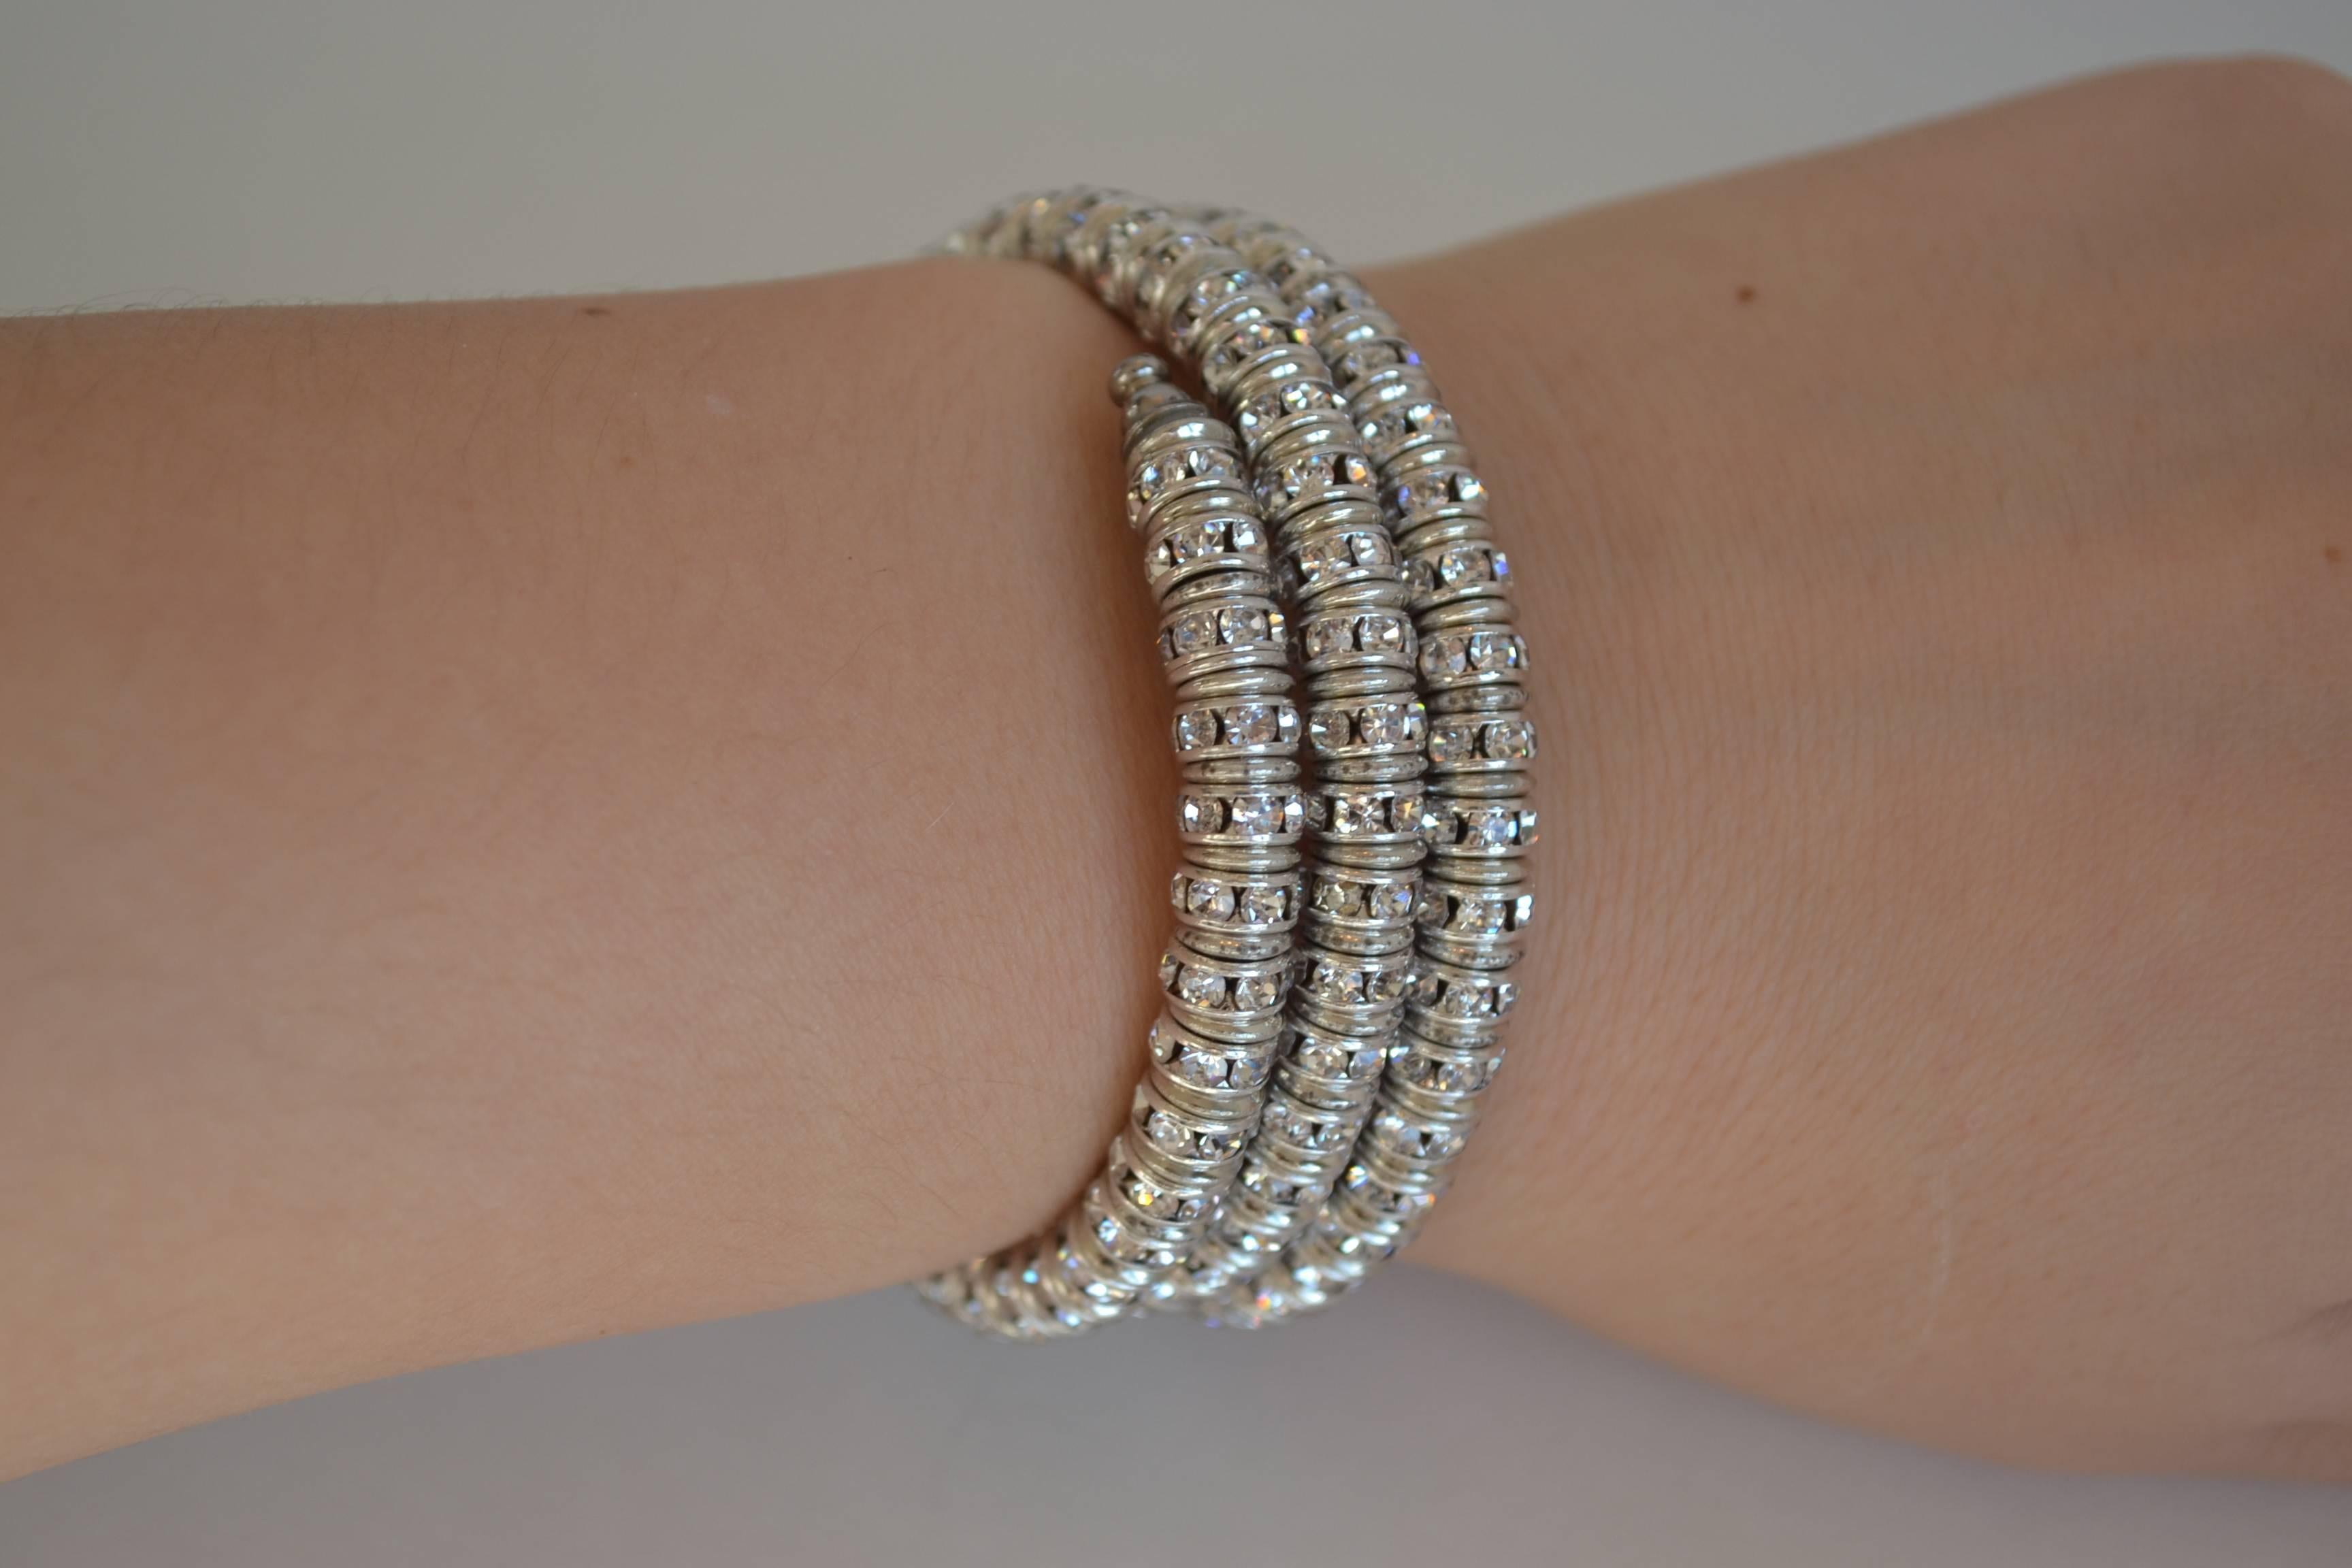 Memory wire wrap bracelet with clear Swarovski crystal rondelles from Francoise Montague. Fits most wrists both large and small and is easy to take on and off.